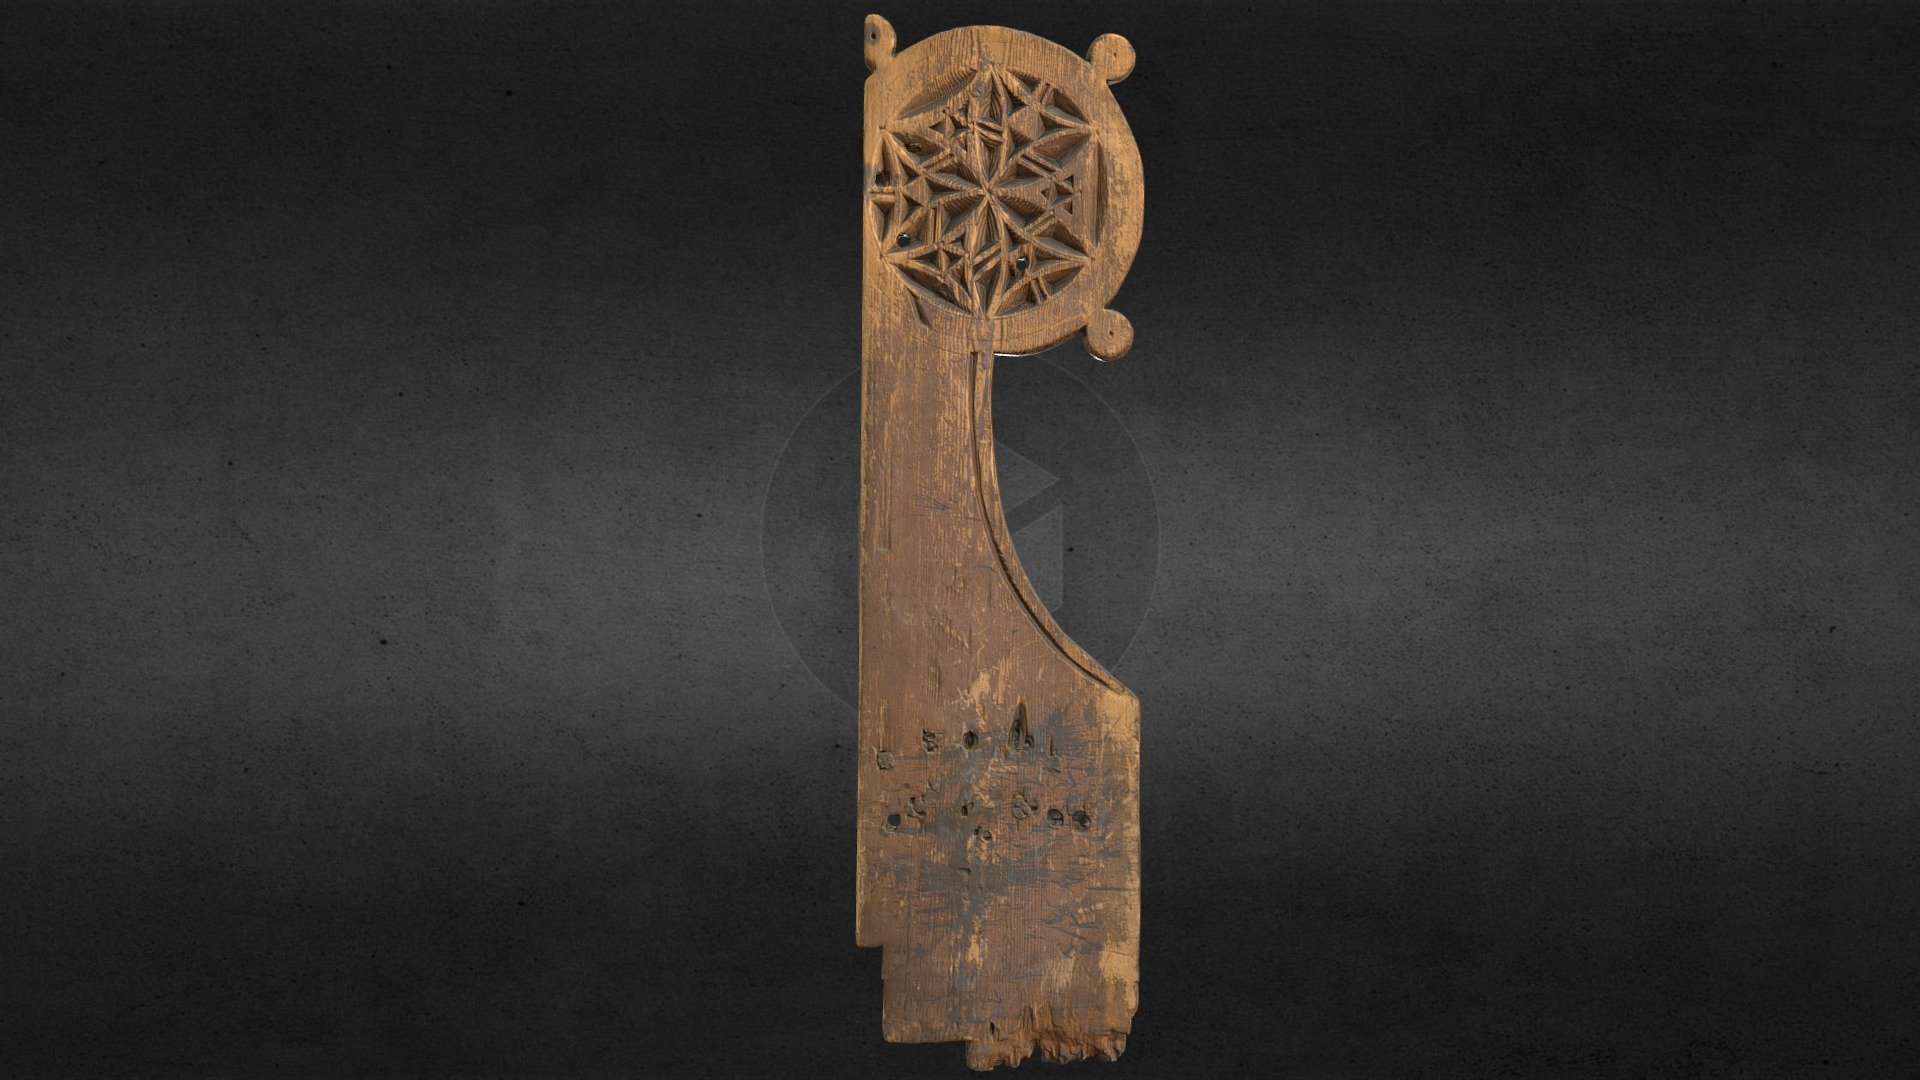 This carved bench end was incorporated into the benches standing in the “Parish Church” until 1874. It was then sent with th remaining decorated bench ends to the Museum of Nordic Antiquities, the presnt National Museum of Denmark. This presumably late medieval, bench end was in the furniture of the &ldquo;Parish Church